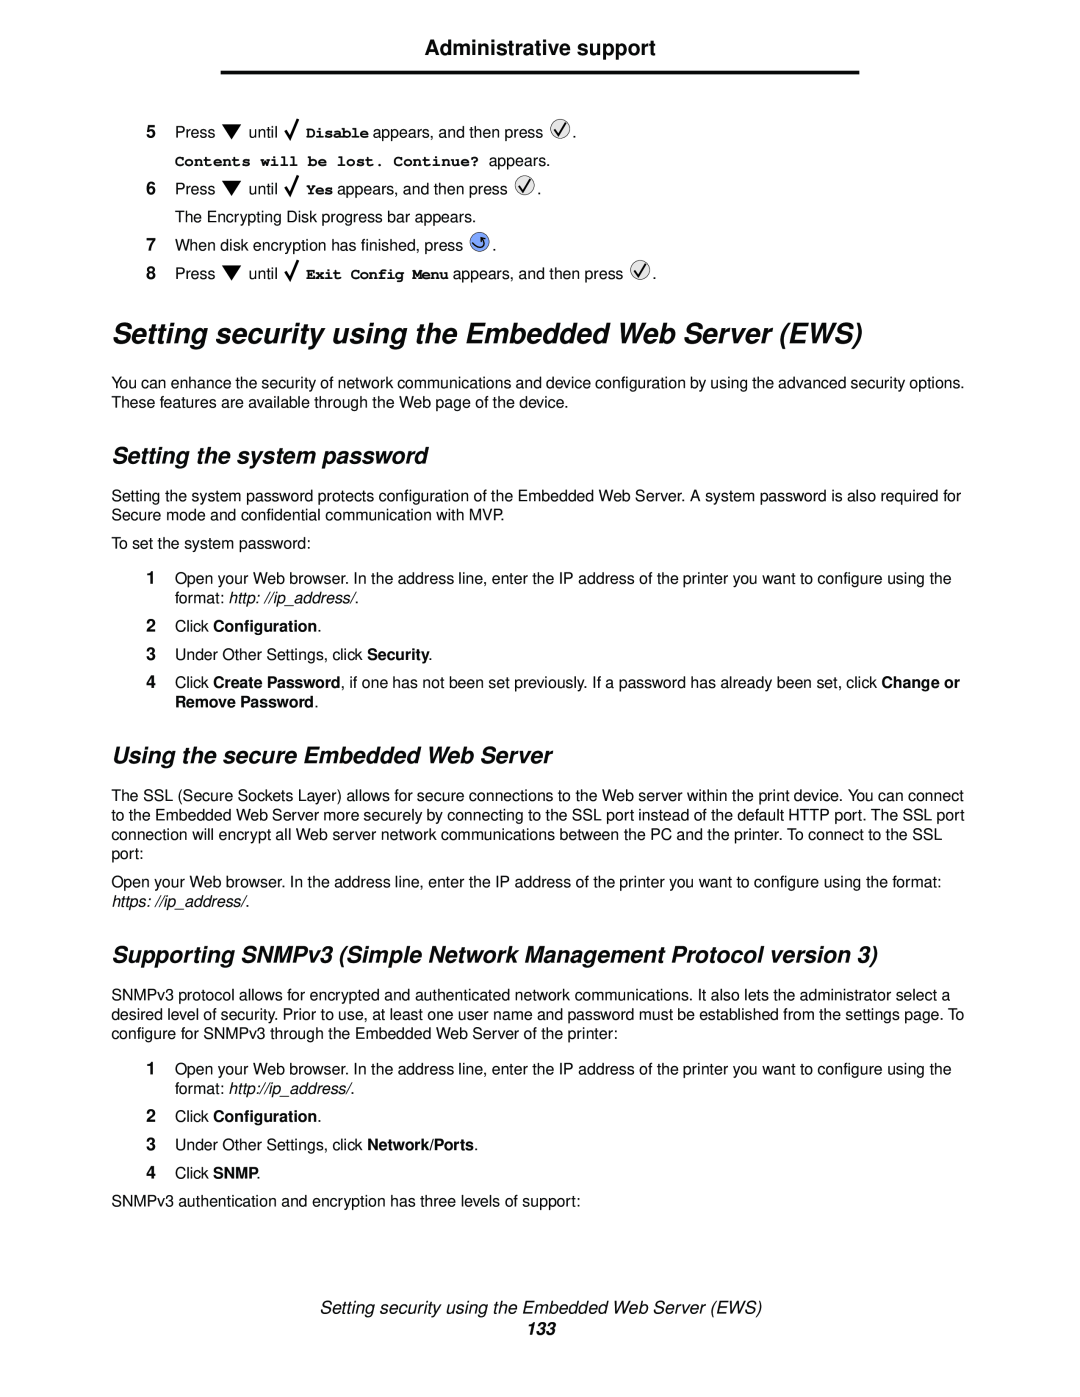 Lexmark 920 manual Setting security using the Embedded Web Server EWS, Setting the system password, Administrative support 